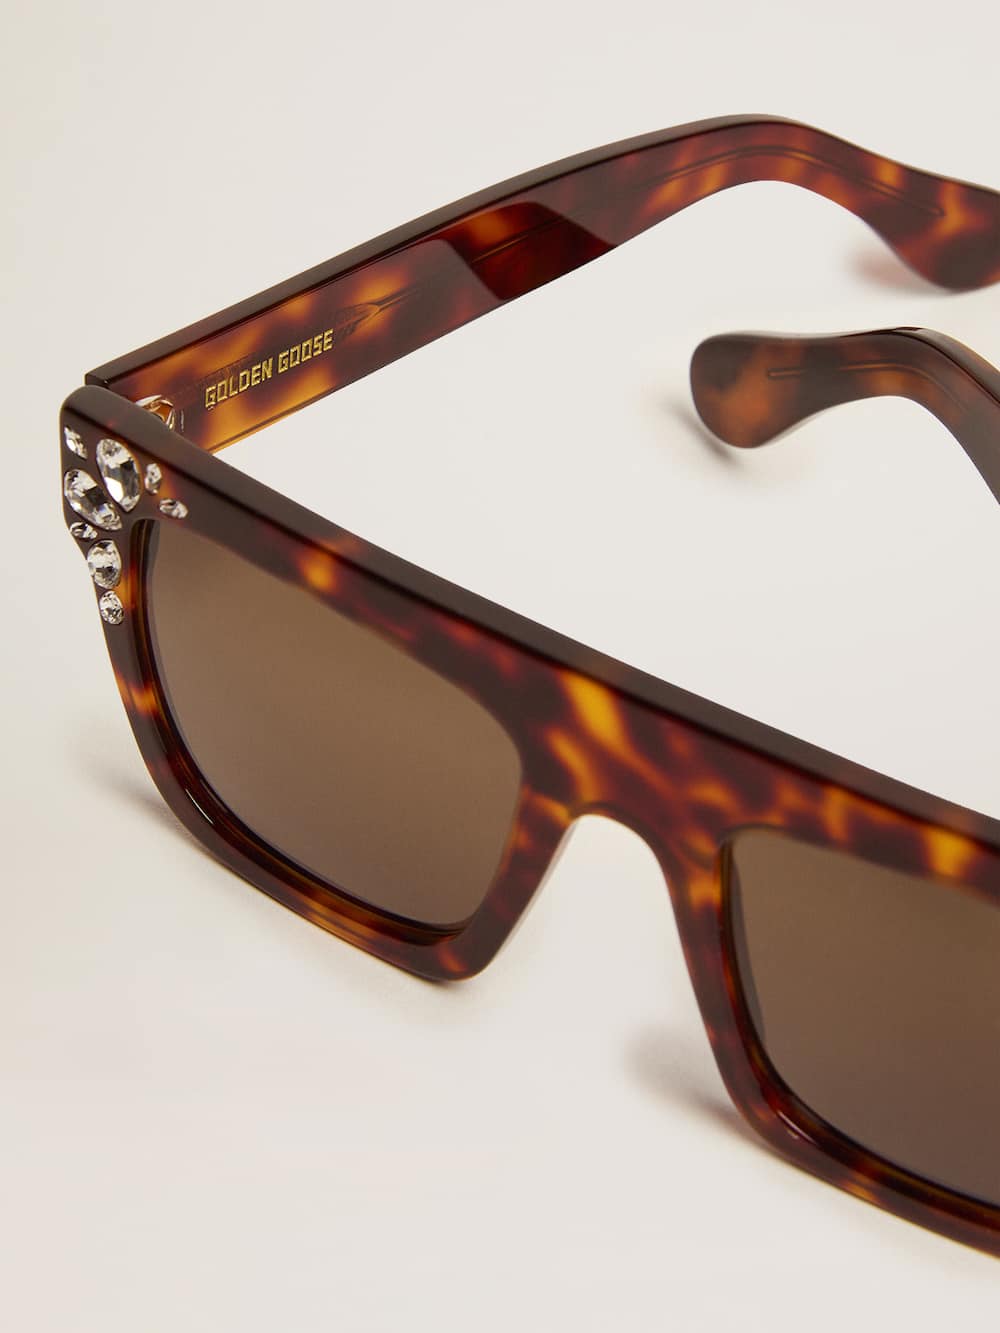 Golden Goose - Square model sunglasses with havana frame and crystals in 